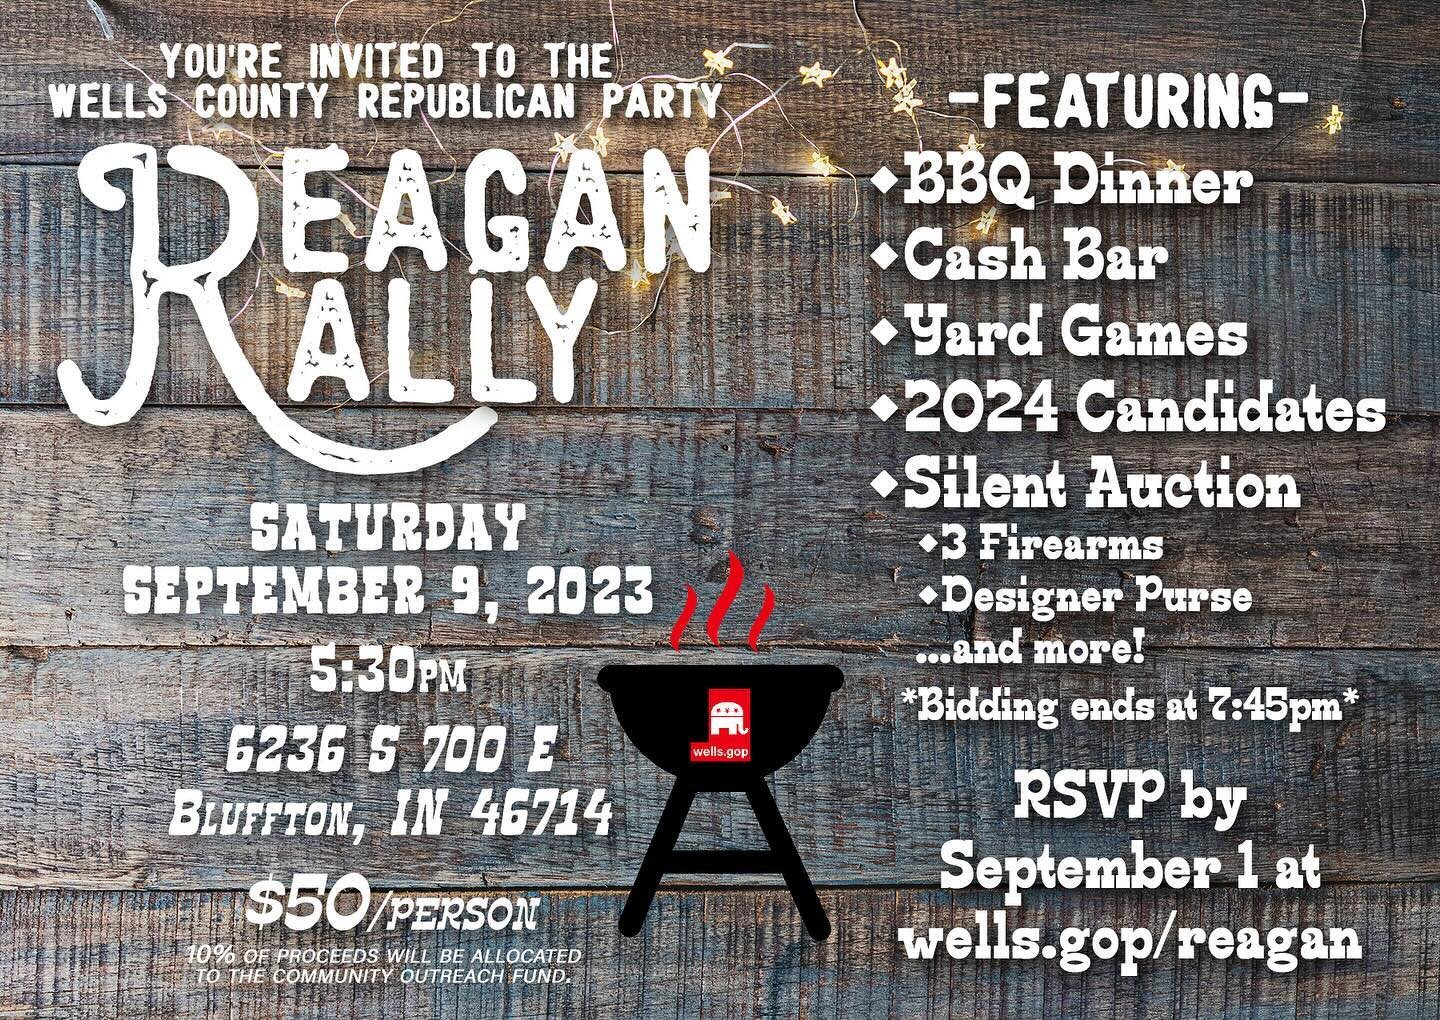 Join us at the annual Wells County Republican Reagan Rally on September 9. Ticket information is available on our website listed in our bio.